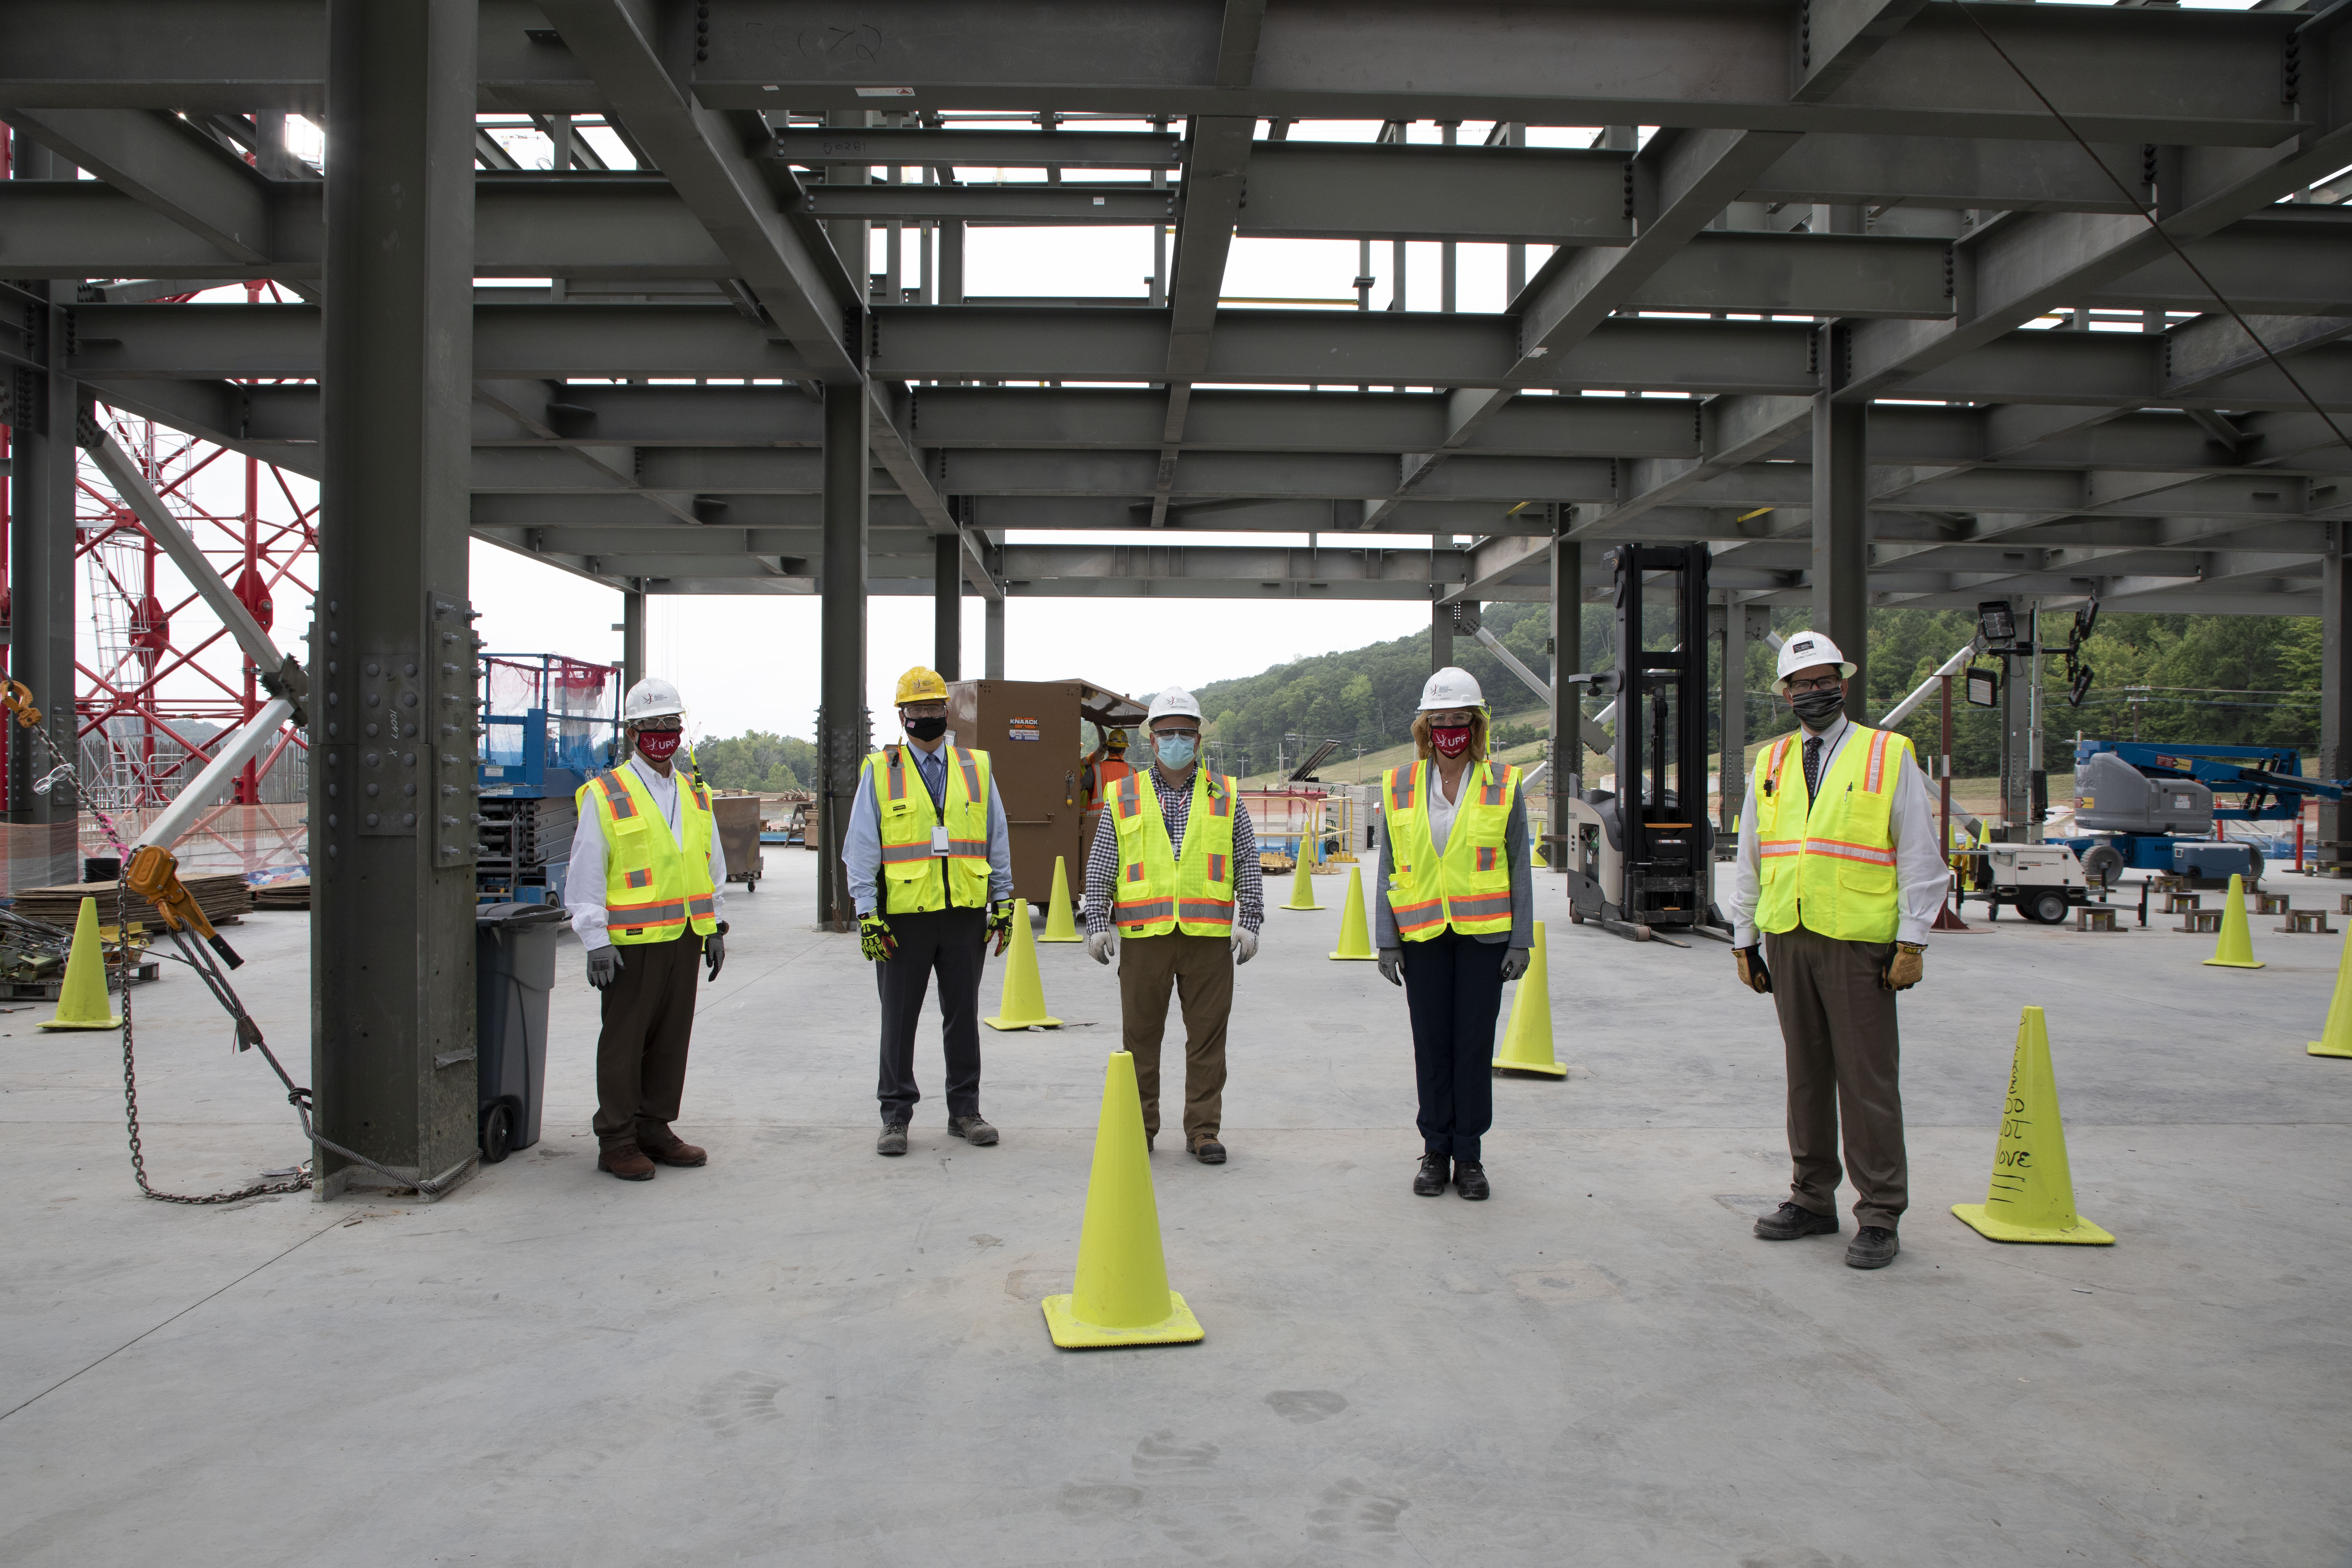 From left: Doug Fremont, NNSA chief of staff; John Howanitz, UPF project director; Randy Holman, UPF area manager for the Salvage and Accountability Building; NNSA Administrator Lisa Gordon-Hagerty; and Dale Christenson, UPF federal project director during the administrator’s visit to Y-12 on August 27, 2020